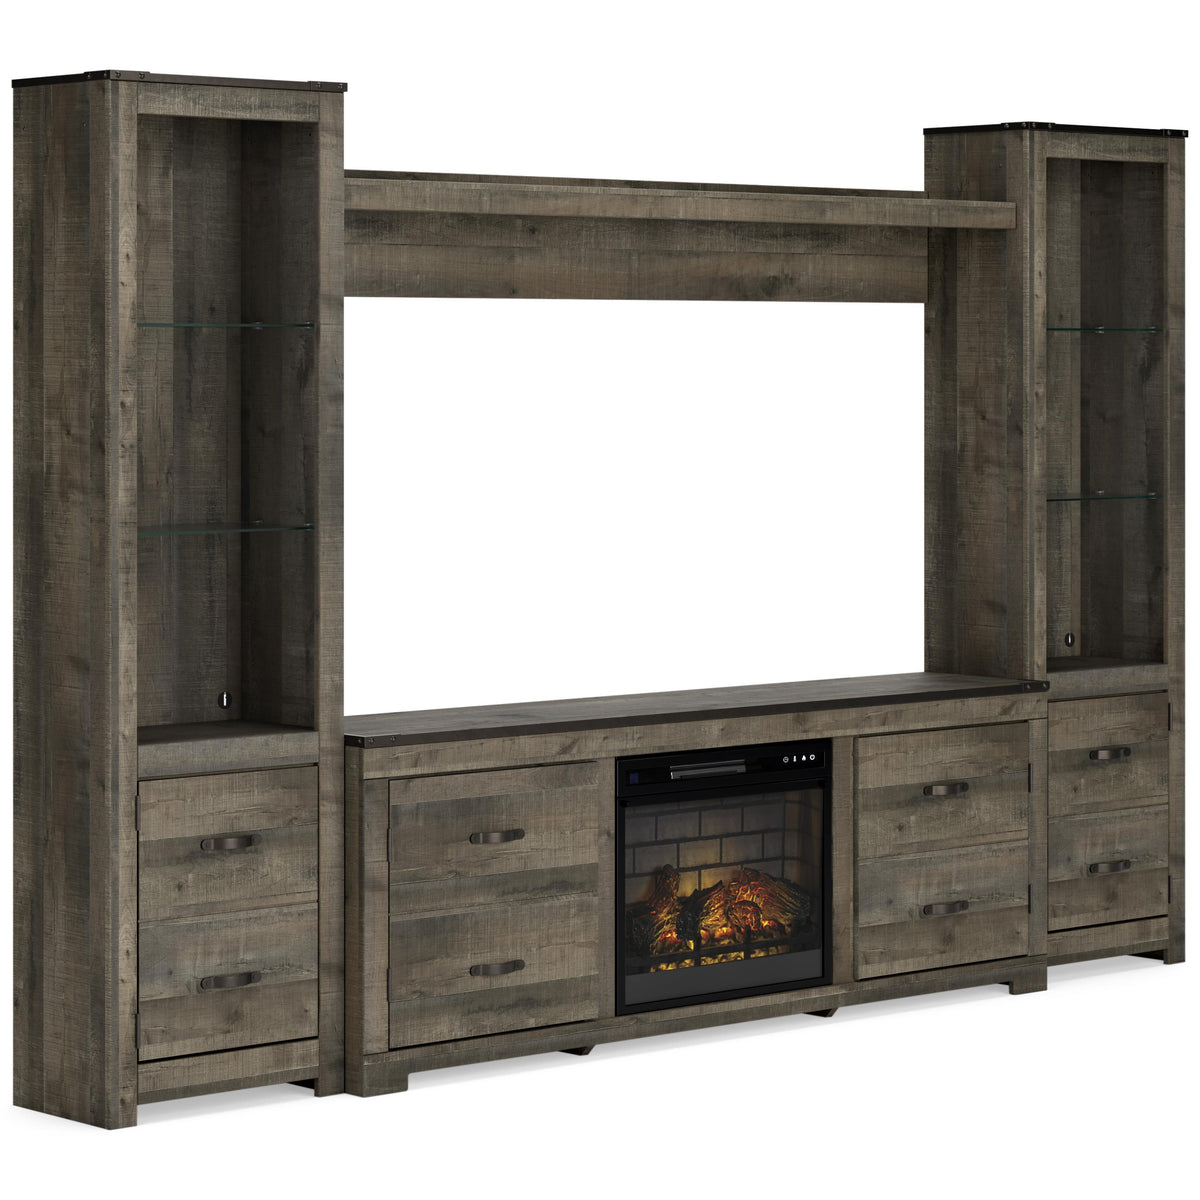 Signature Design by Ashley Trinell W446W17 4 pc Entertainment Center with Electric Fireplace